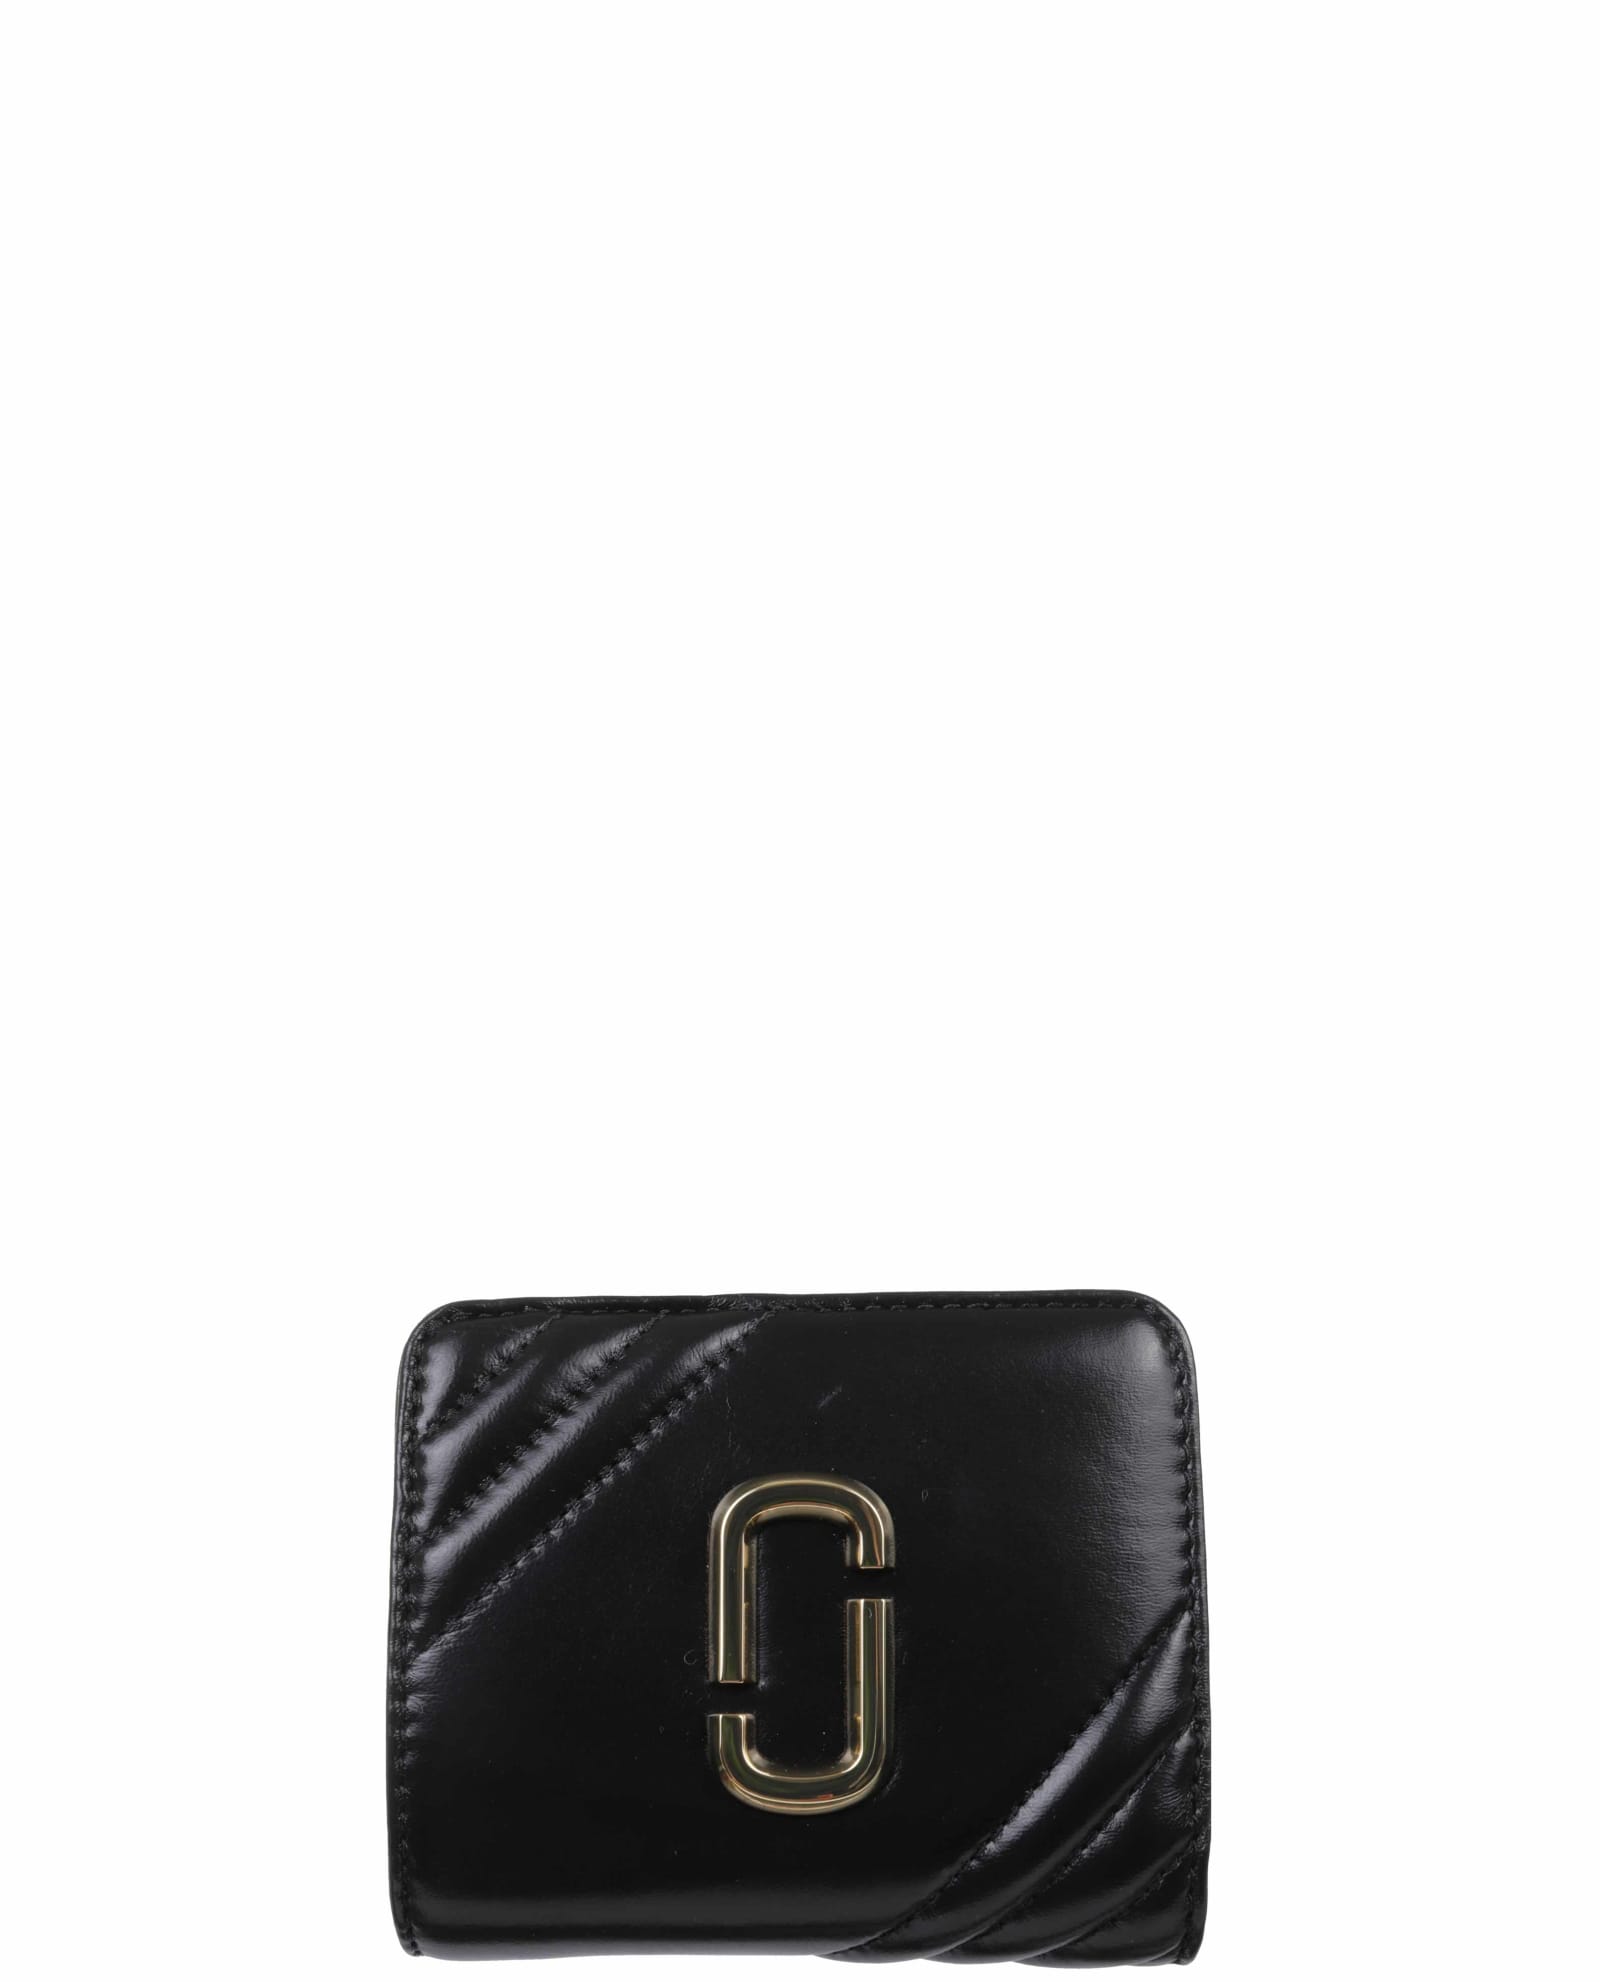 The Marc Jacobs Black Glam Shot Compact Wallet